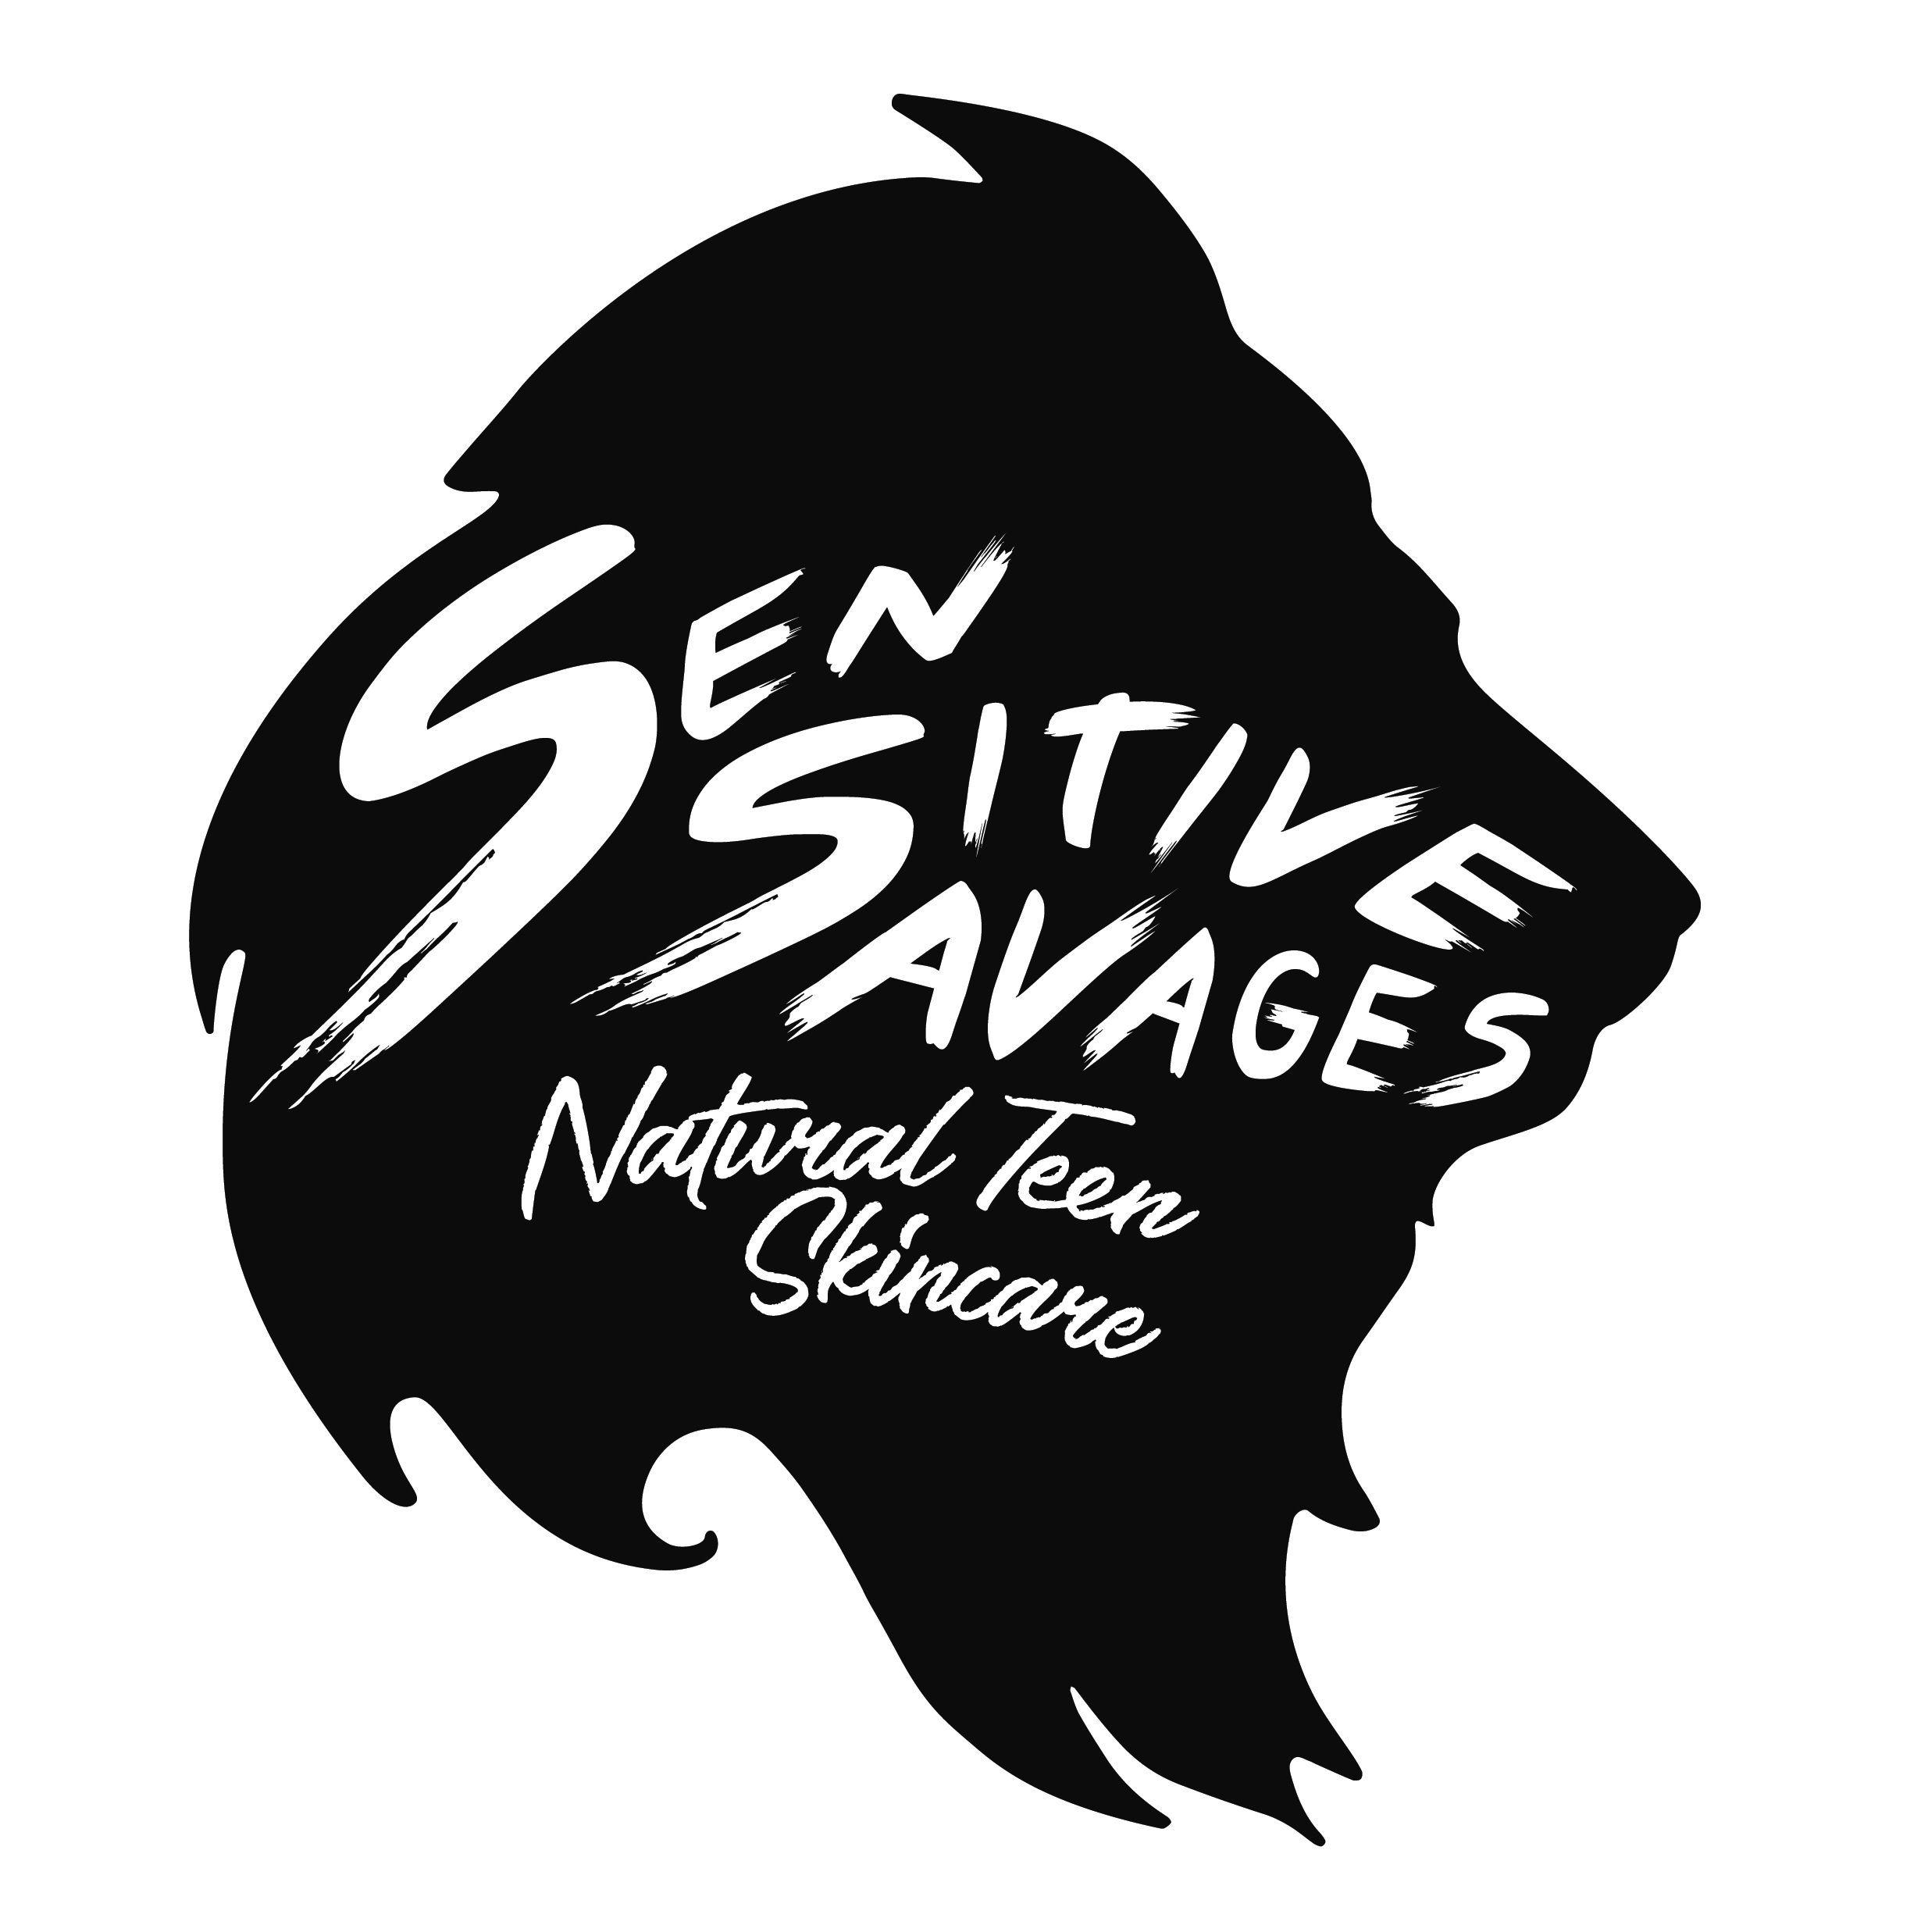 Savages Logo - The Sensitive Savages modern edgy youthful logo has a grunge or punk